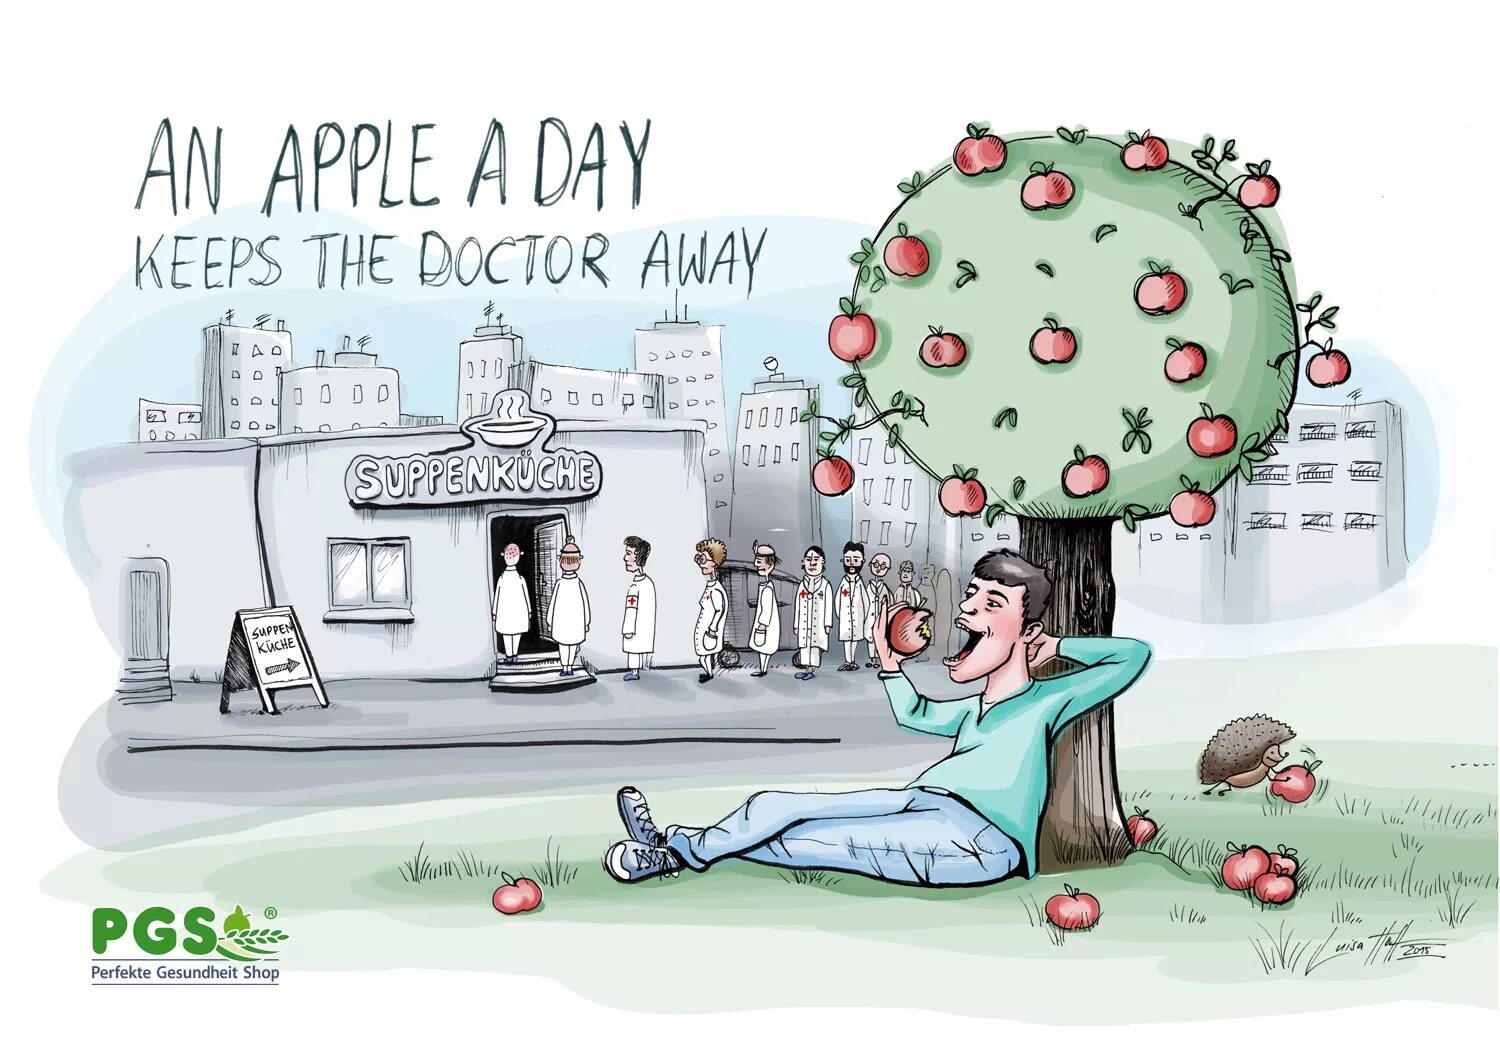 An apple a day keeps the away. One Apple a Day keeps Doctors away. An Apple a Day keeps the Doctor away картинки. An Apple a Day keeps the Doctor away иллюстрация. An Apple a Day keeps the Doctor away идиома.